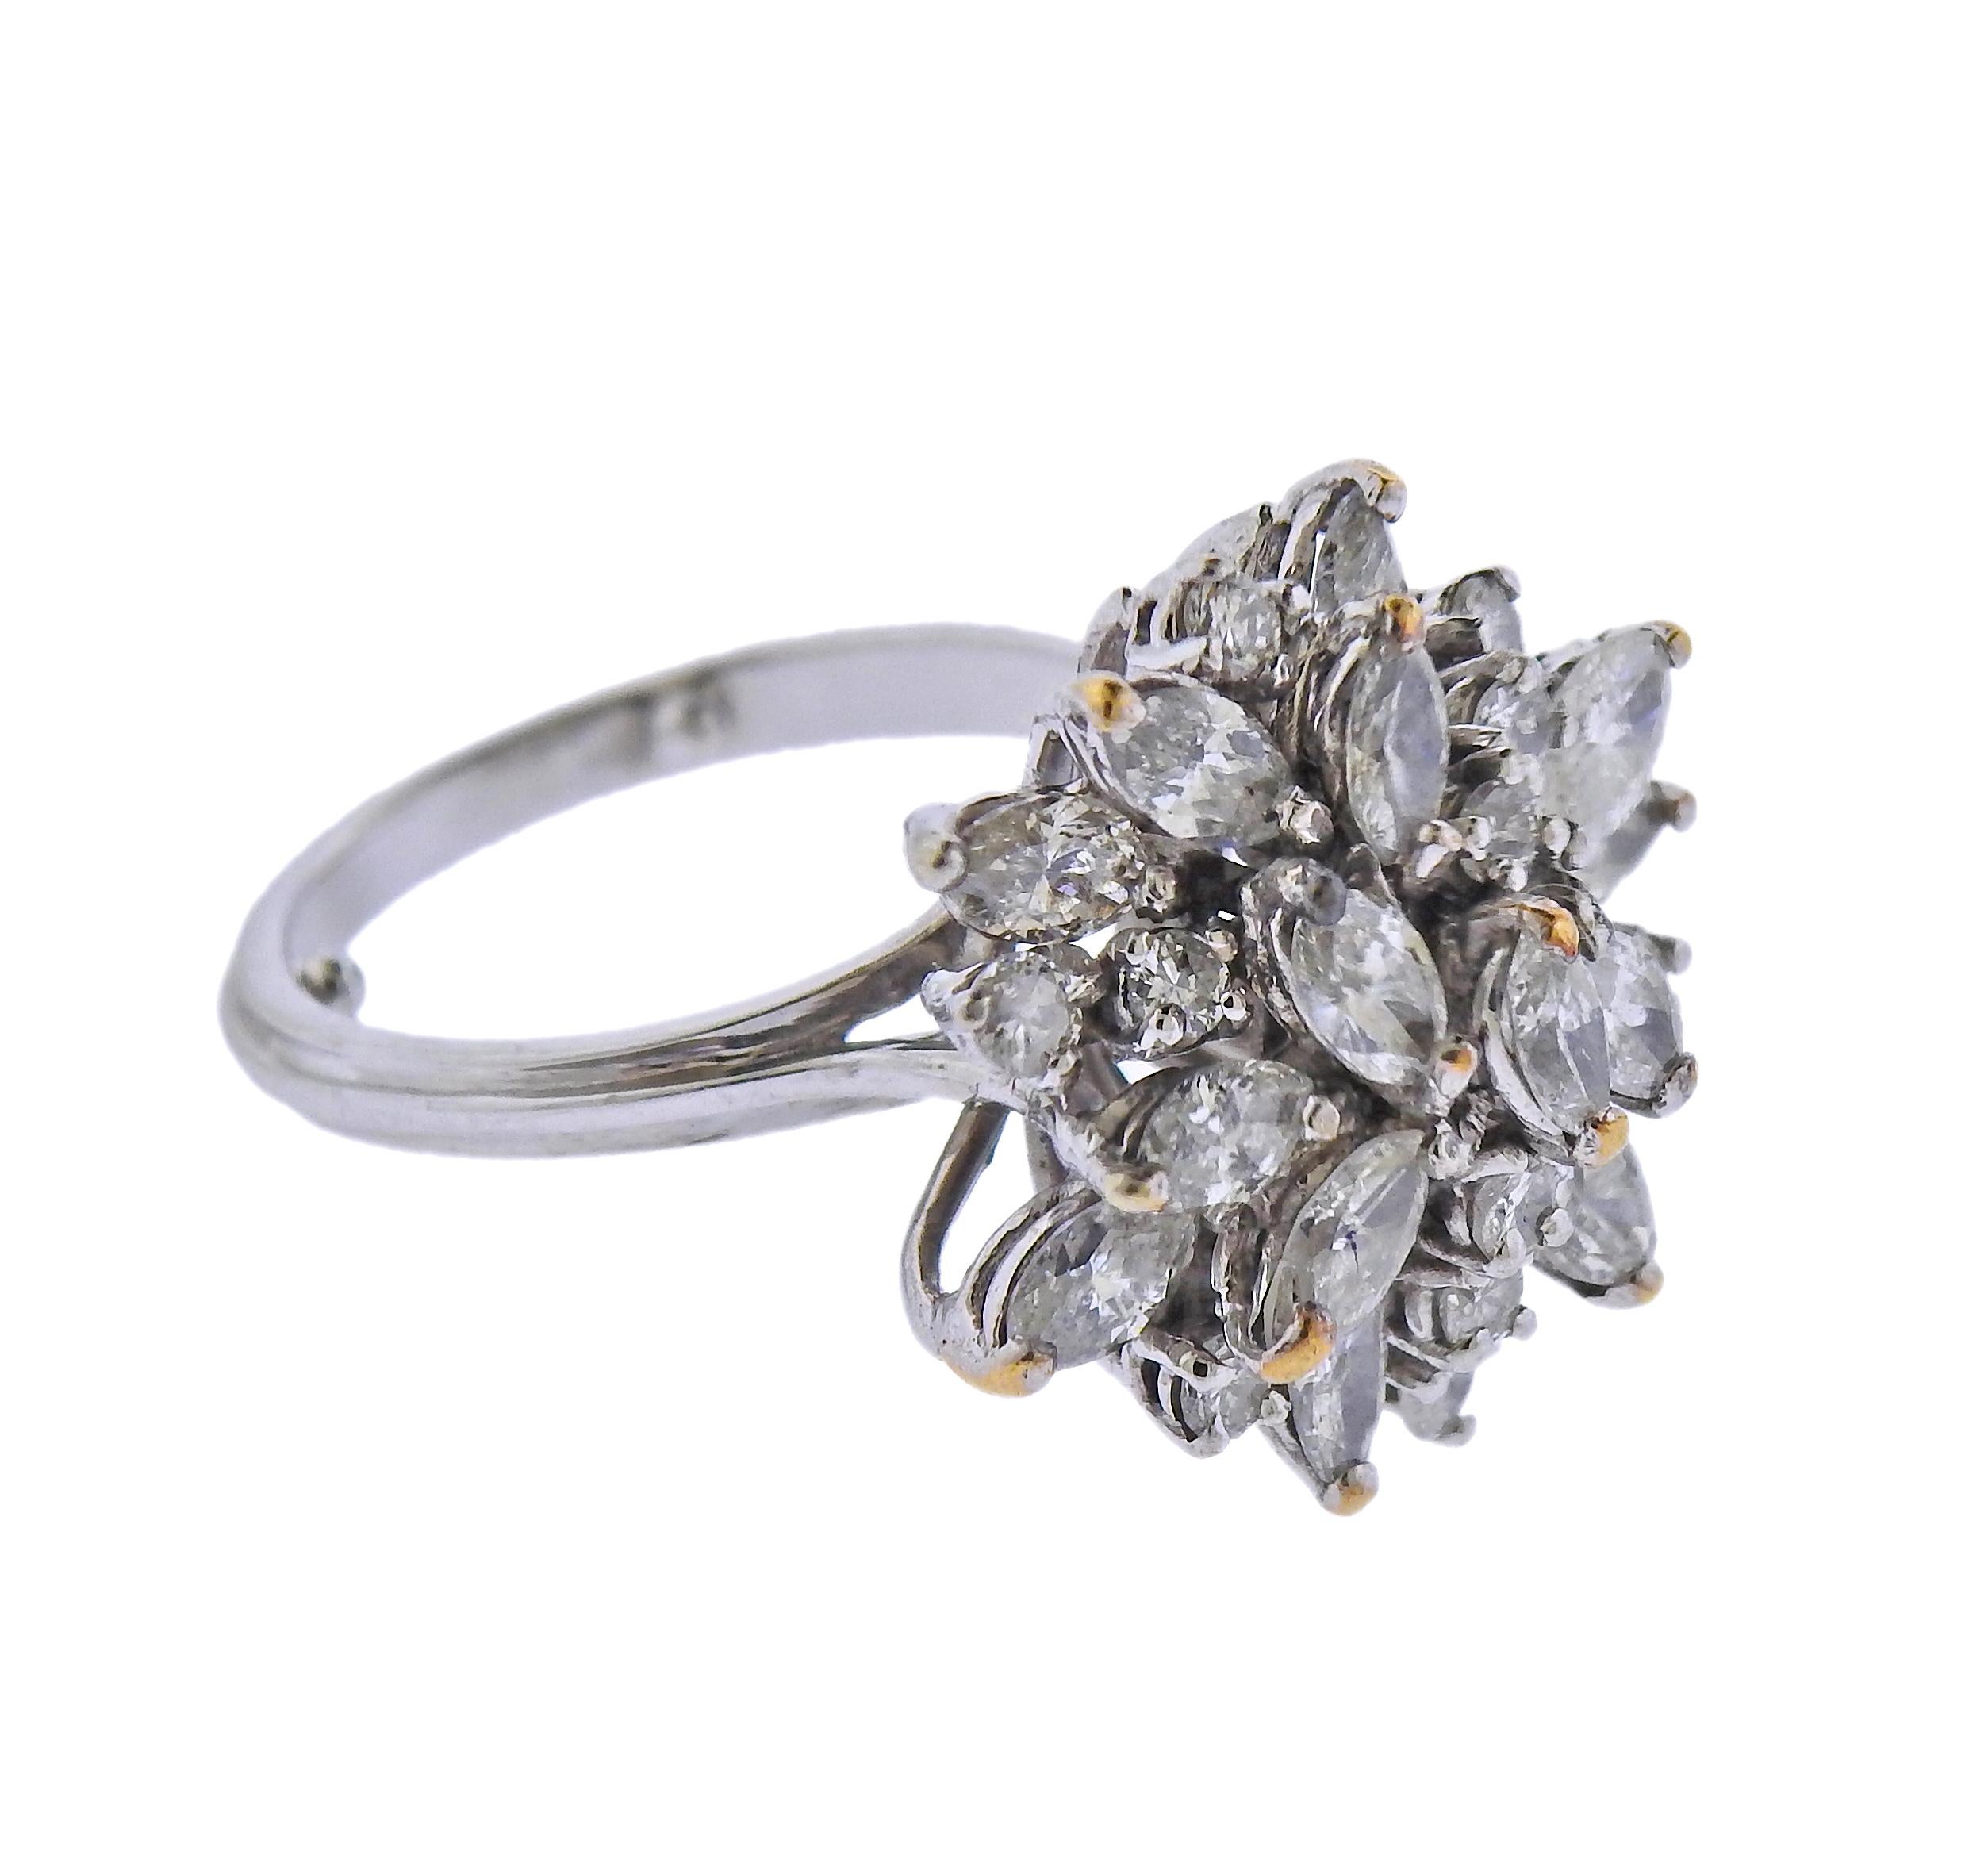 14k gold cluster ring with  a mix of round and marquise diamonds - total of approx. 2.20ctw. Ring size - 6 (sizing balls can be removed ), ring top - 20mm x 20mm. Weight - 7.1 grams. 